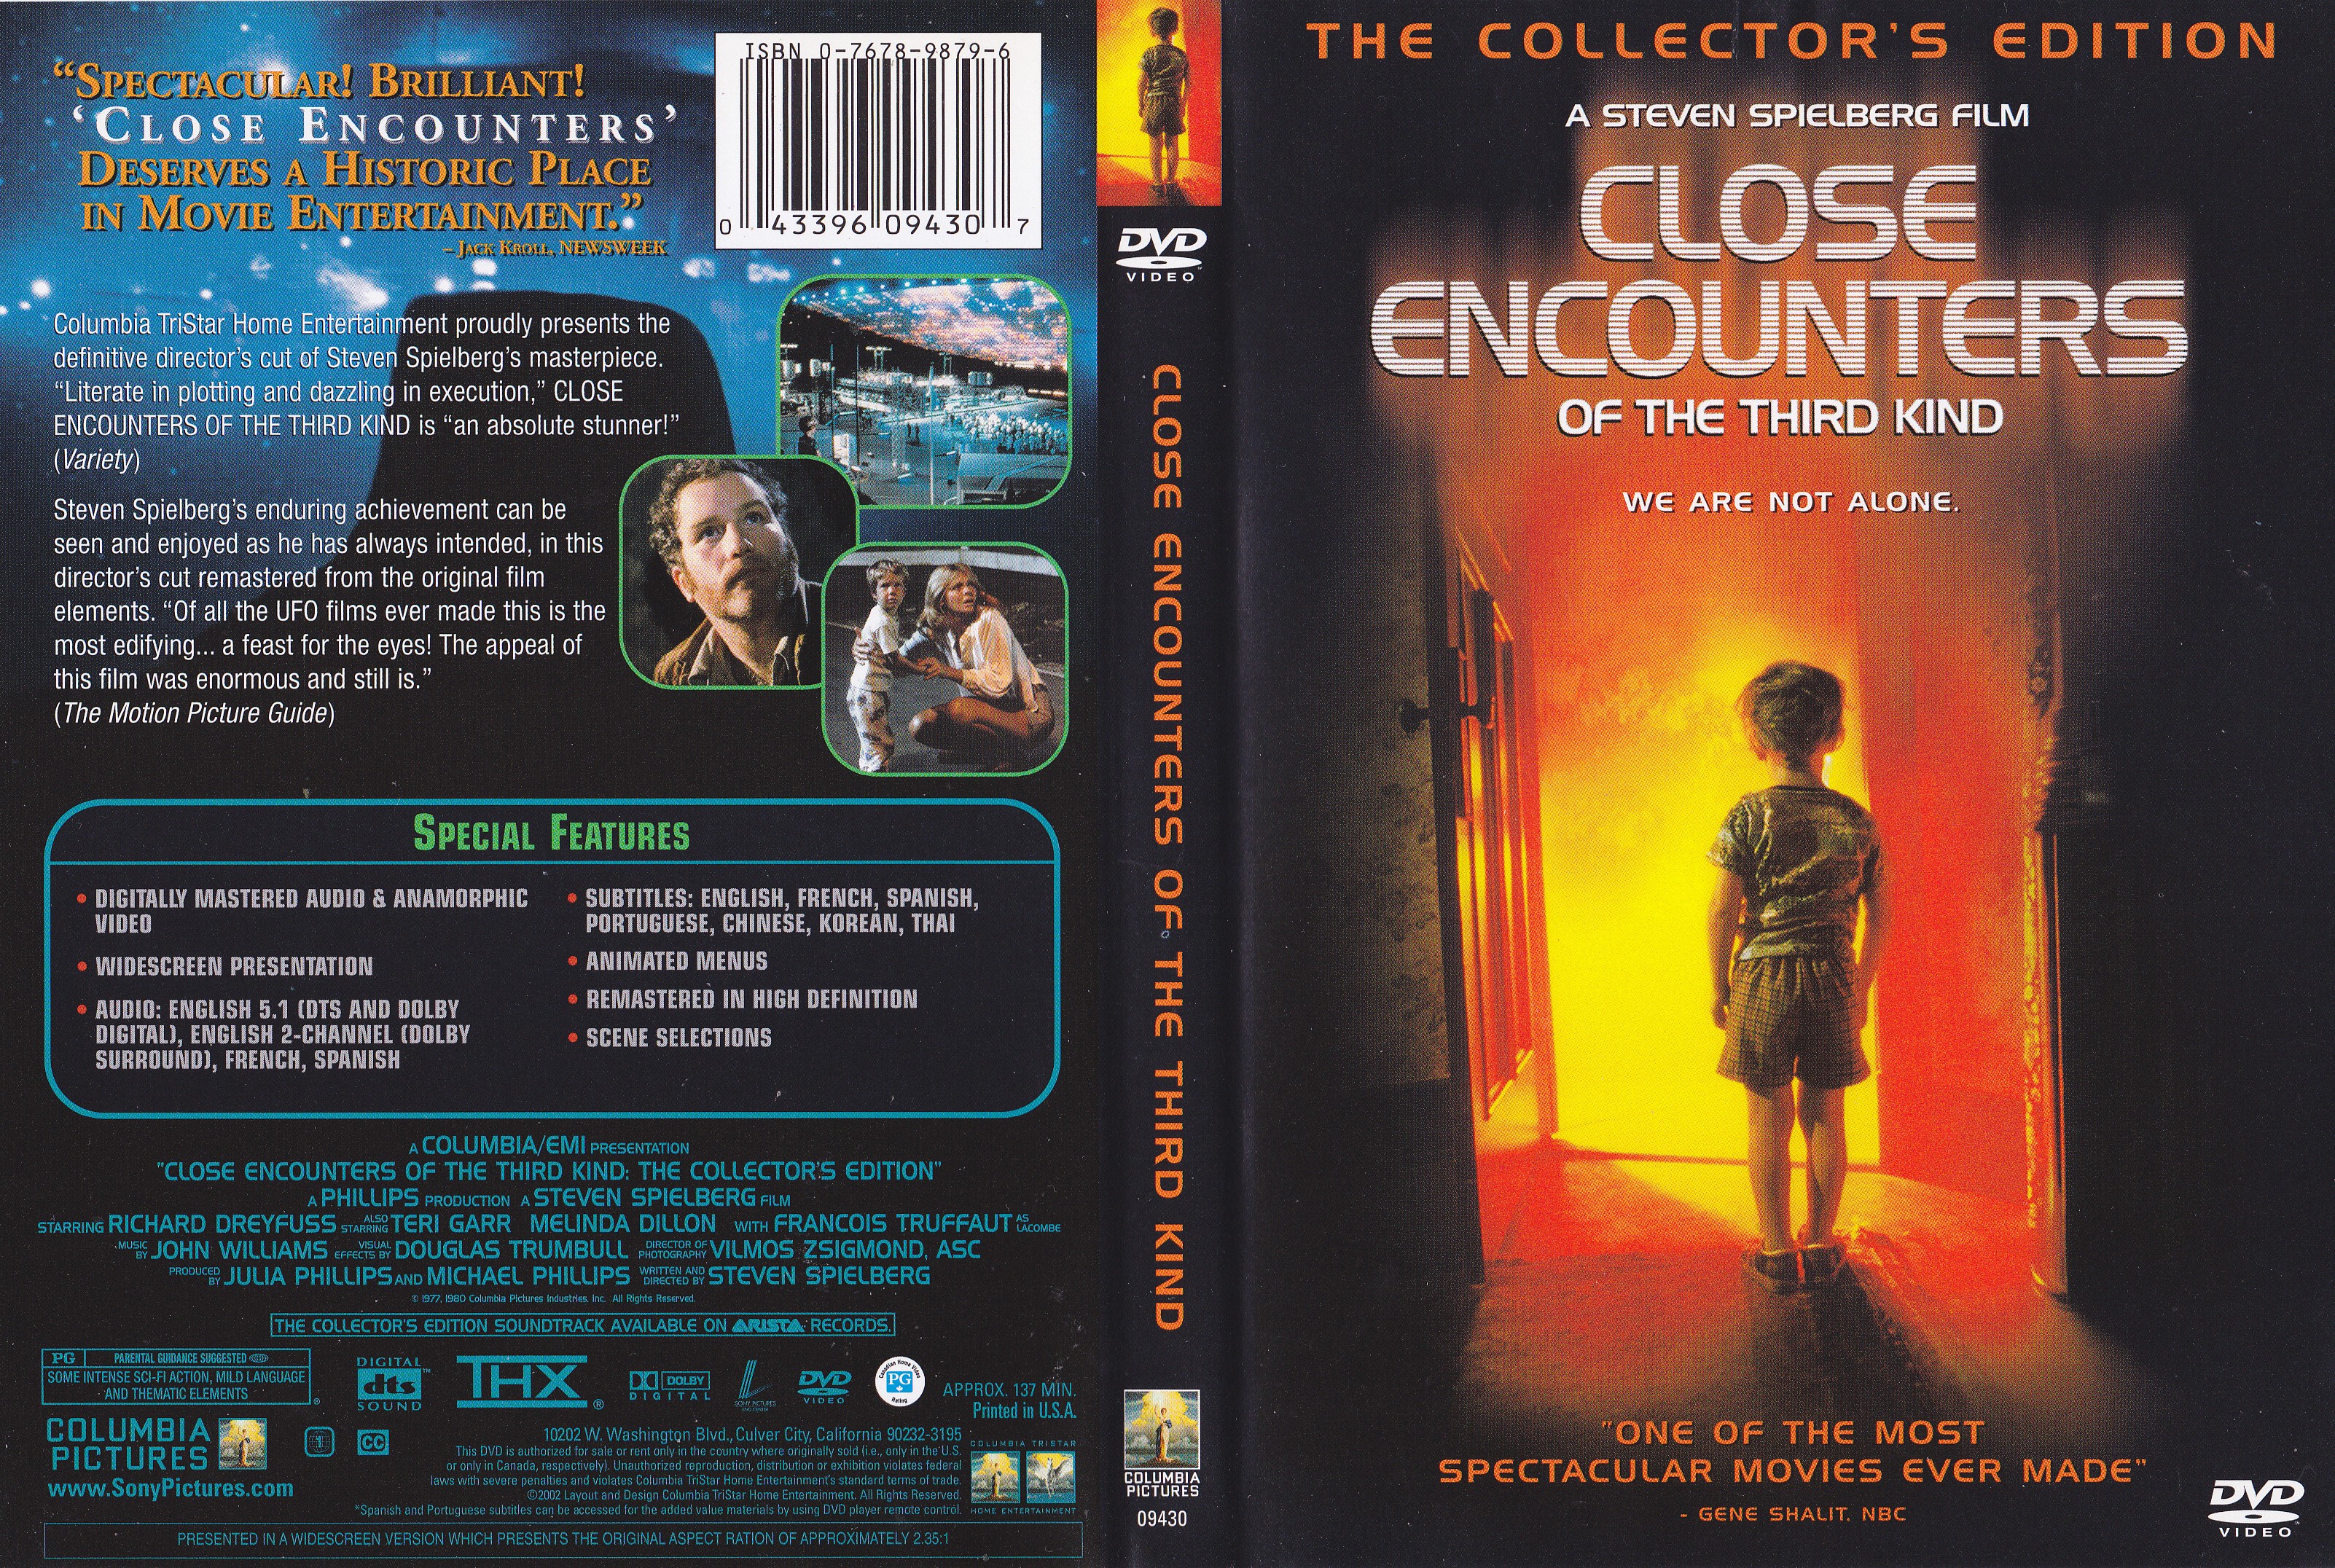 Jaquette DVD Close encounters of the third kind - Rencontres du 3me type (Canadienne)